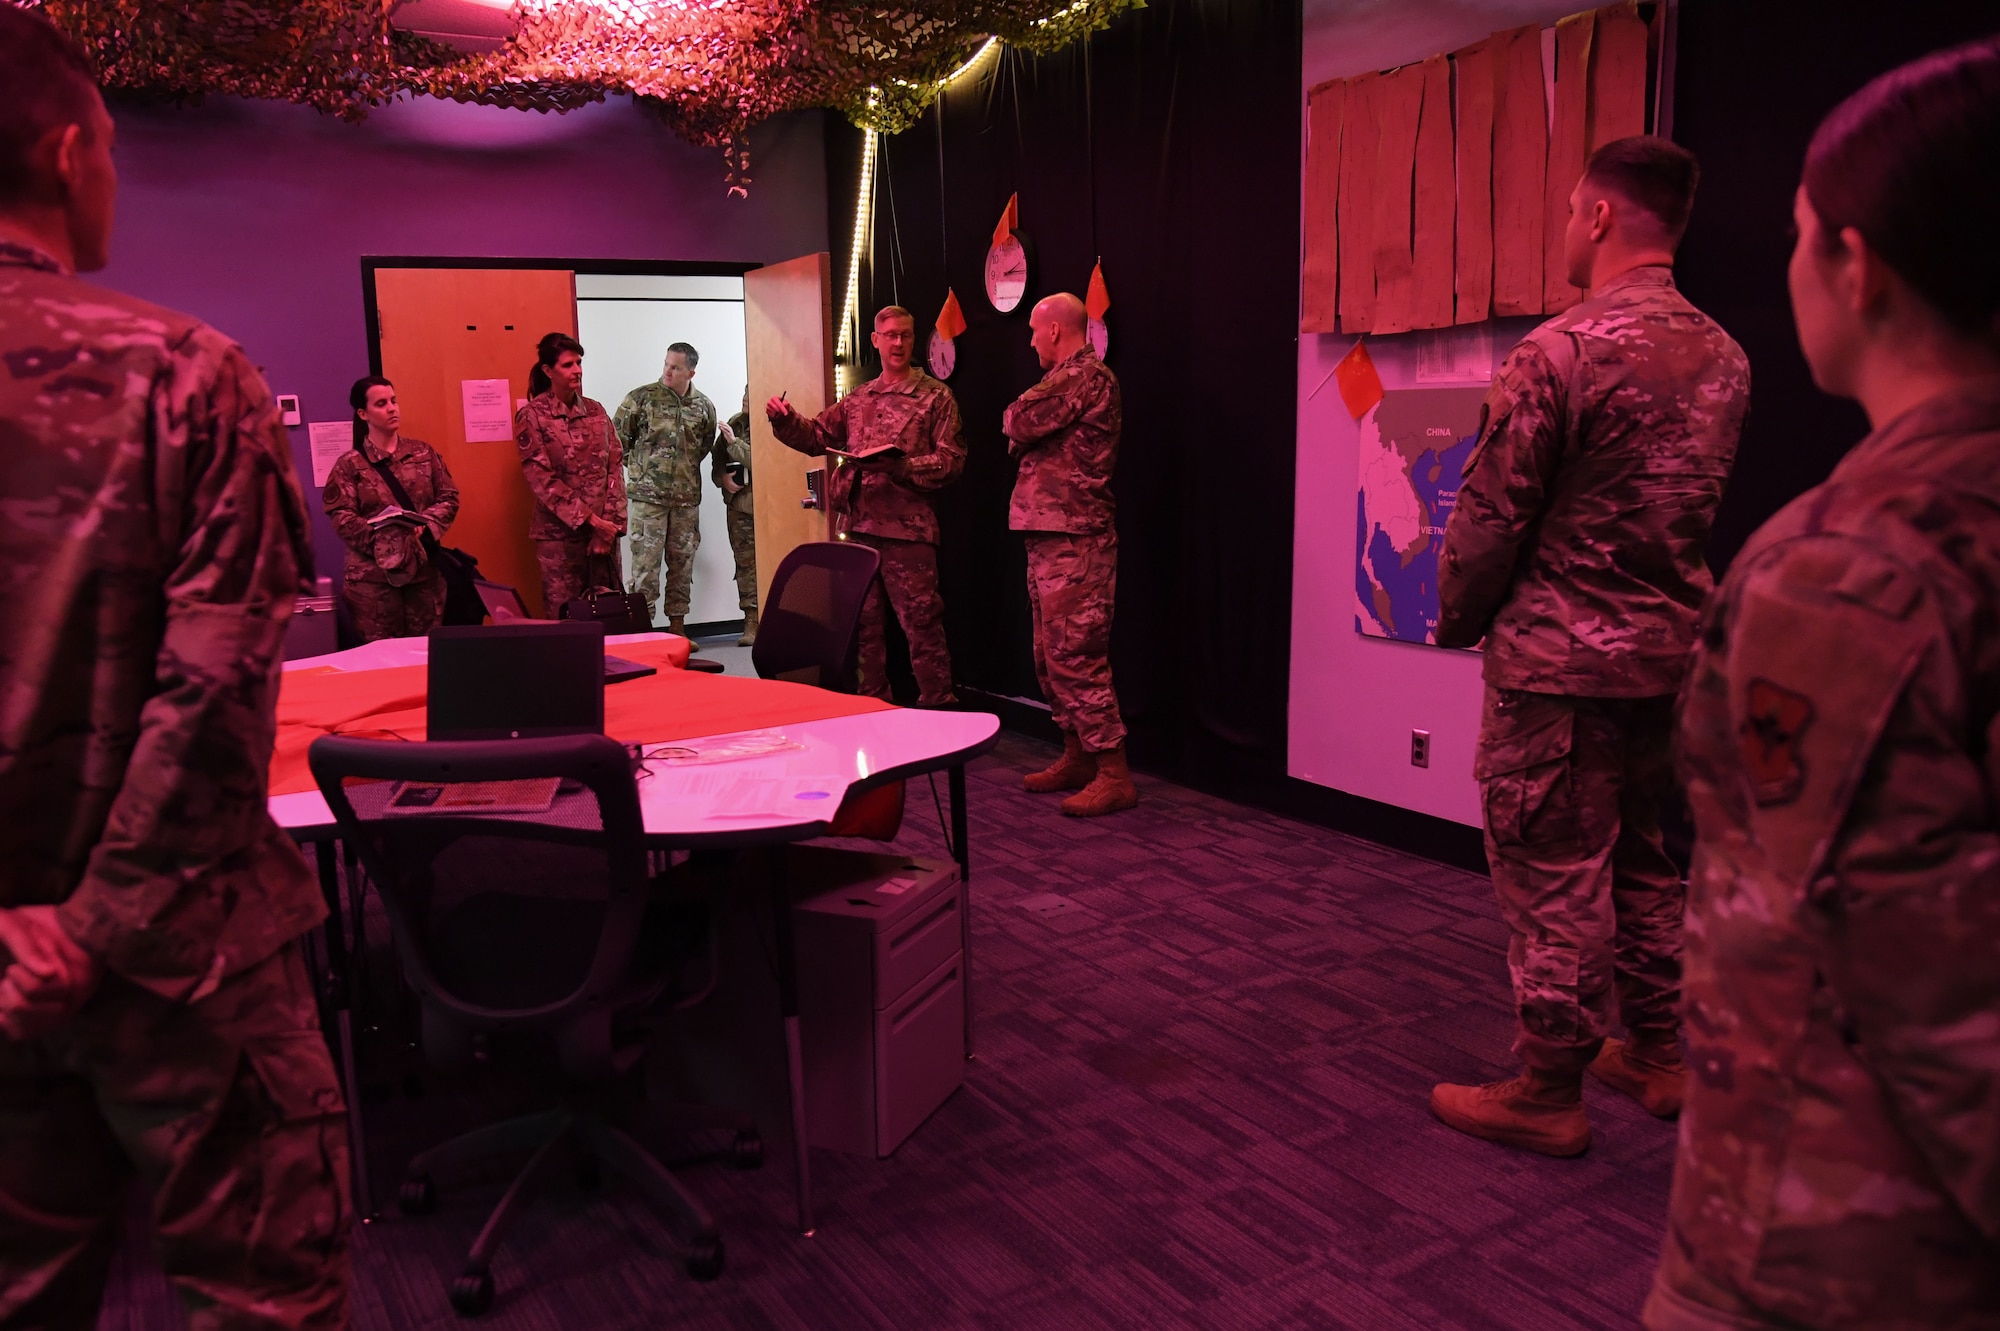 U.S. Air Force Lt. Col. Nicholas Kuc, 333rd Training Squadron commander, provides an overview of the cyber warfare training capabilities inside the 333rd TRS escape room to Gen. David Allvin, Vice Chief of Staff of the Air Force, inside Stennis Hall at Keesler Air Force Base, Mississippi, Nov. 18, 2022.